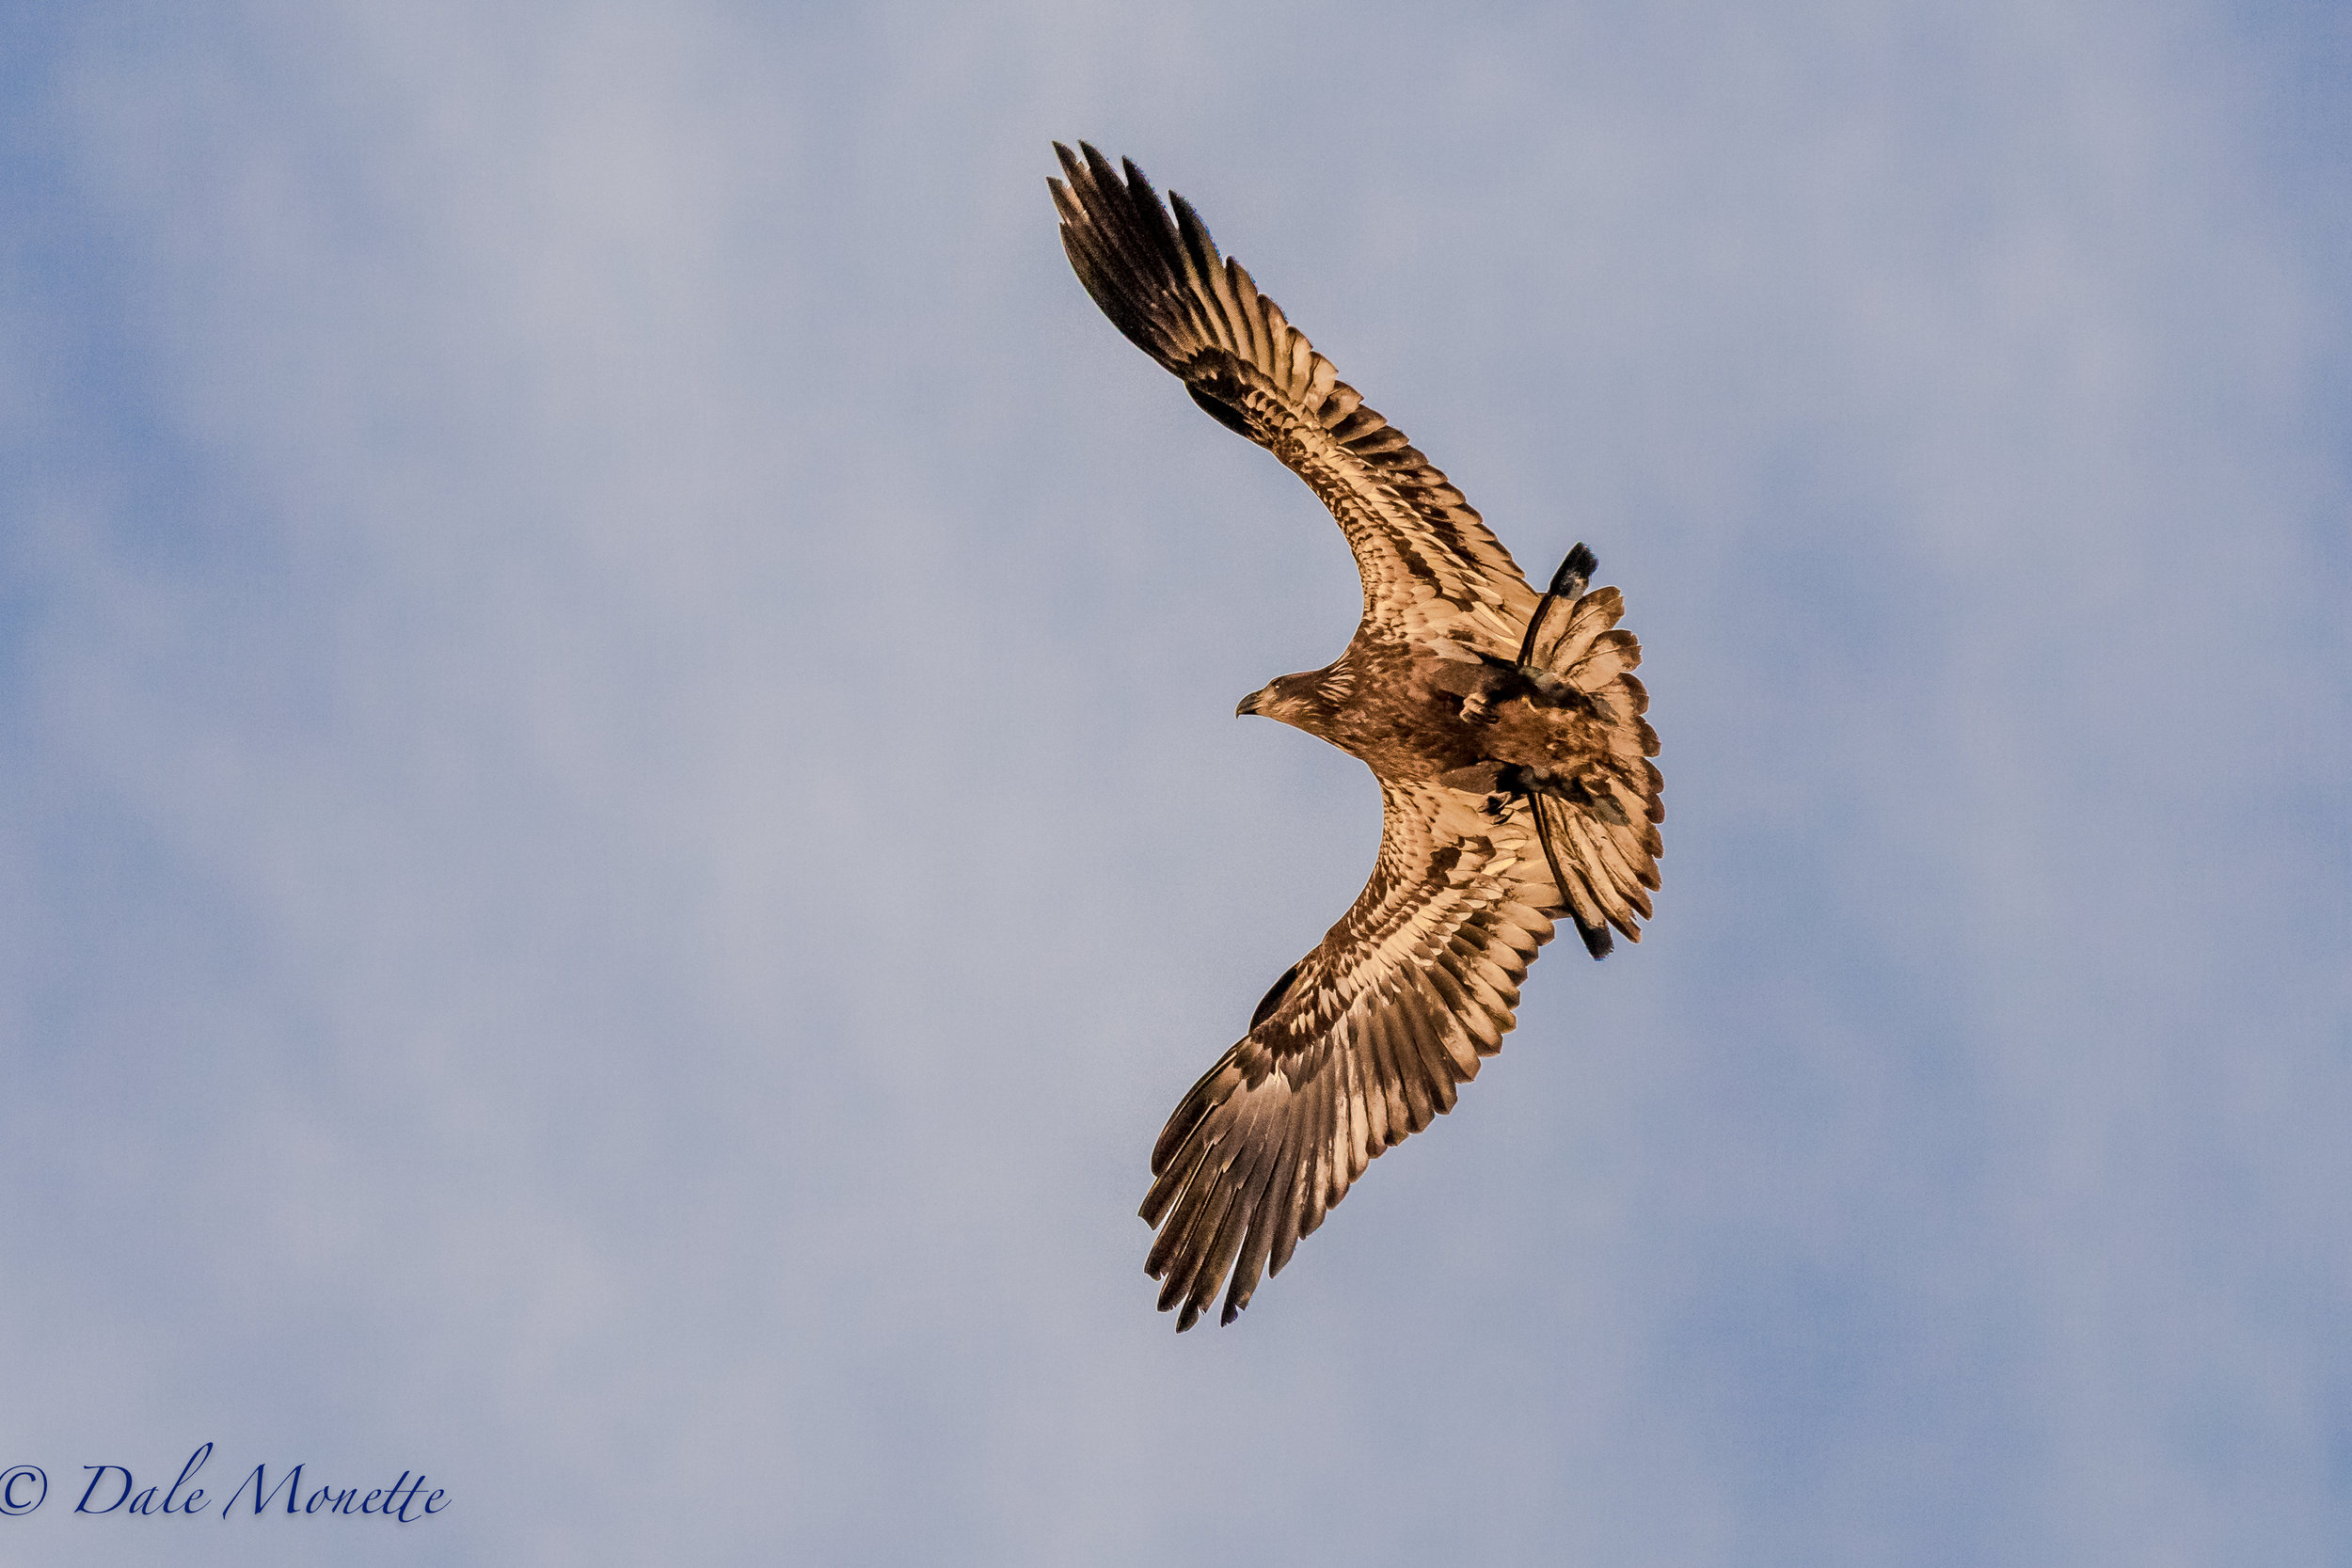   This immature bald eagle shot right over my head this morning and made a U turn and came back. He was up in the rising sunlight and that gave him a gold color. If you look closely you can see the suns reflection in his eye.  